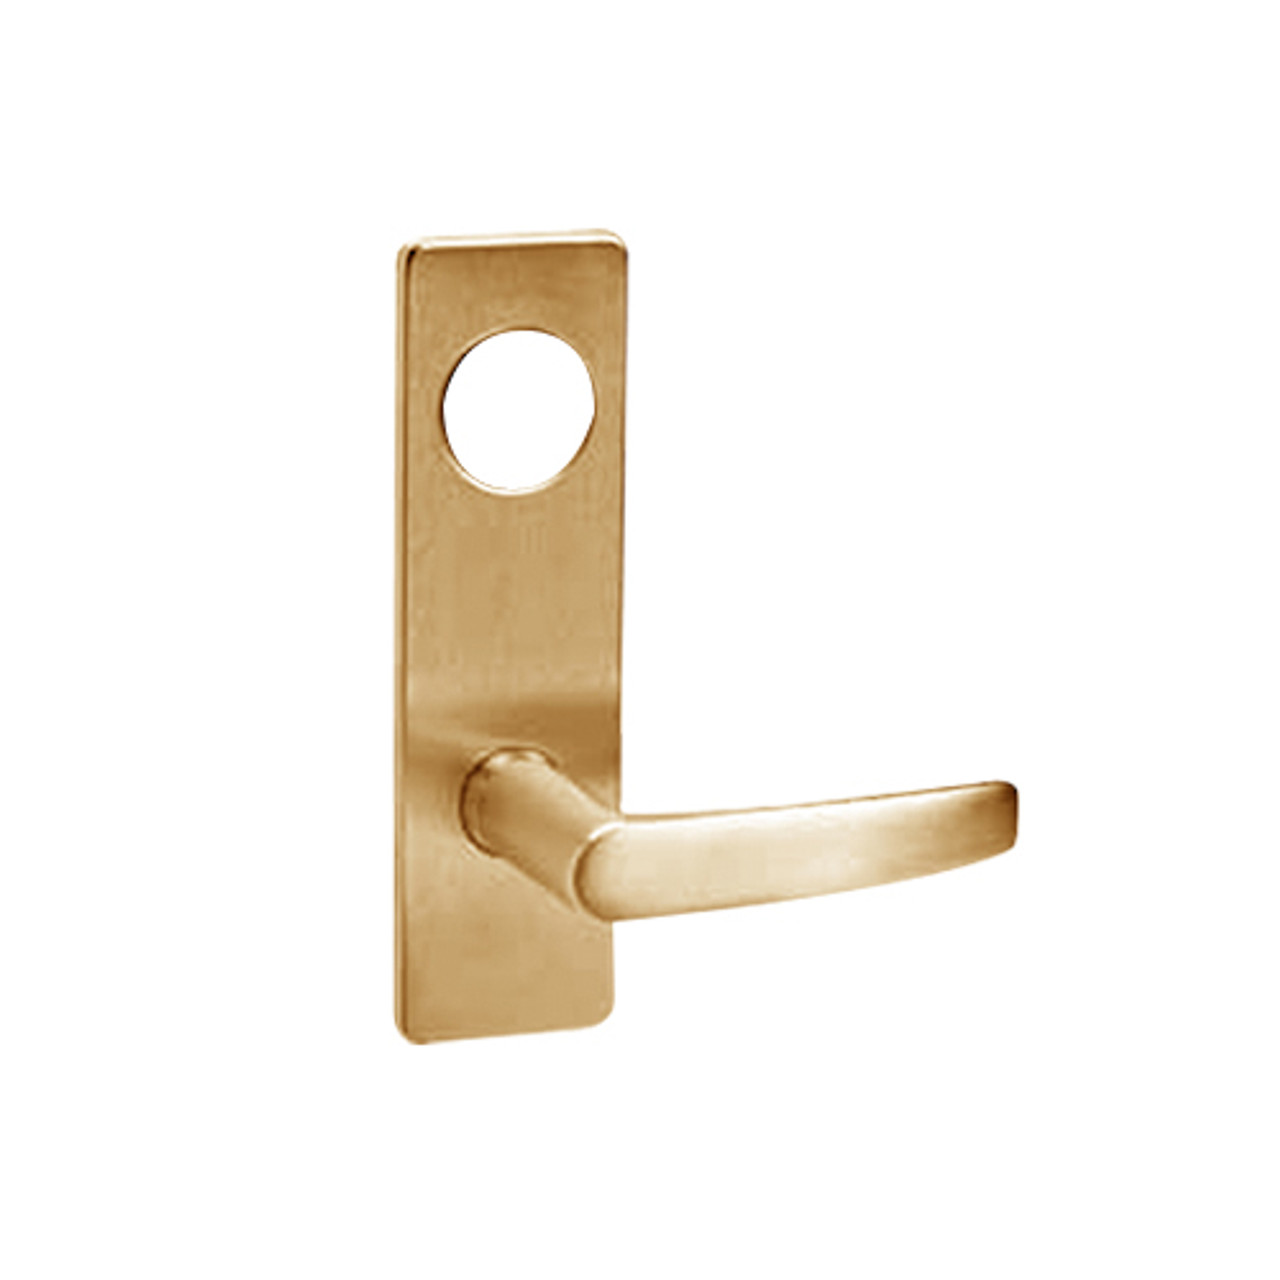 ML2067-ASM-612-LC Corbin Russwin ML2000 Series Mortise Apartment Locksets with Armstrong Lever in Satin Bronze